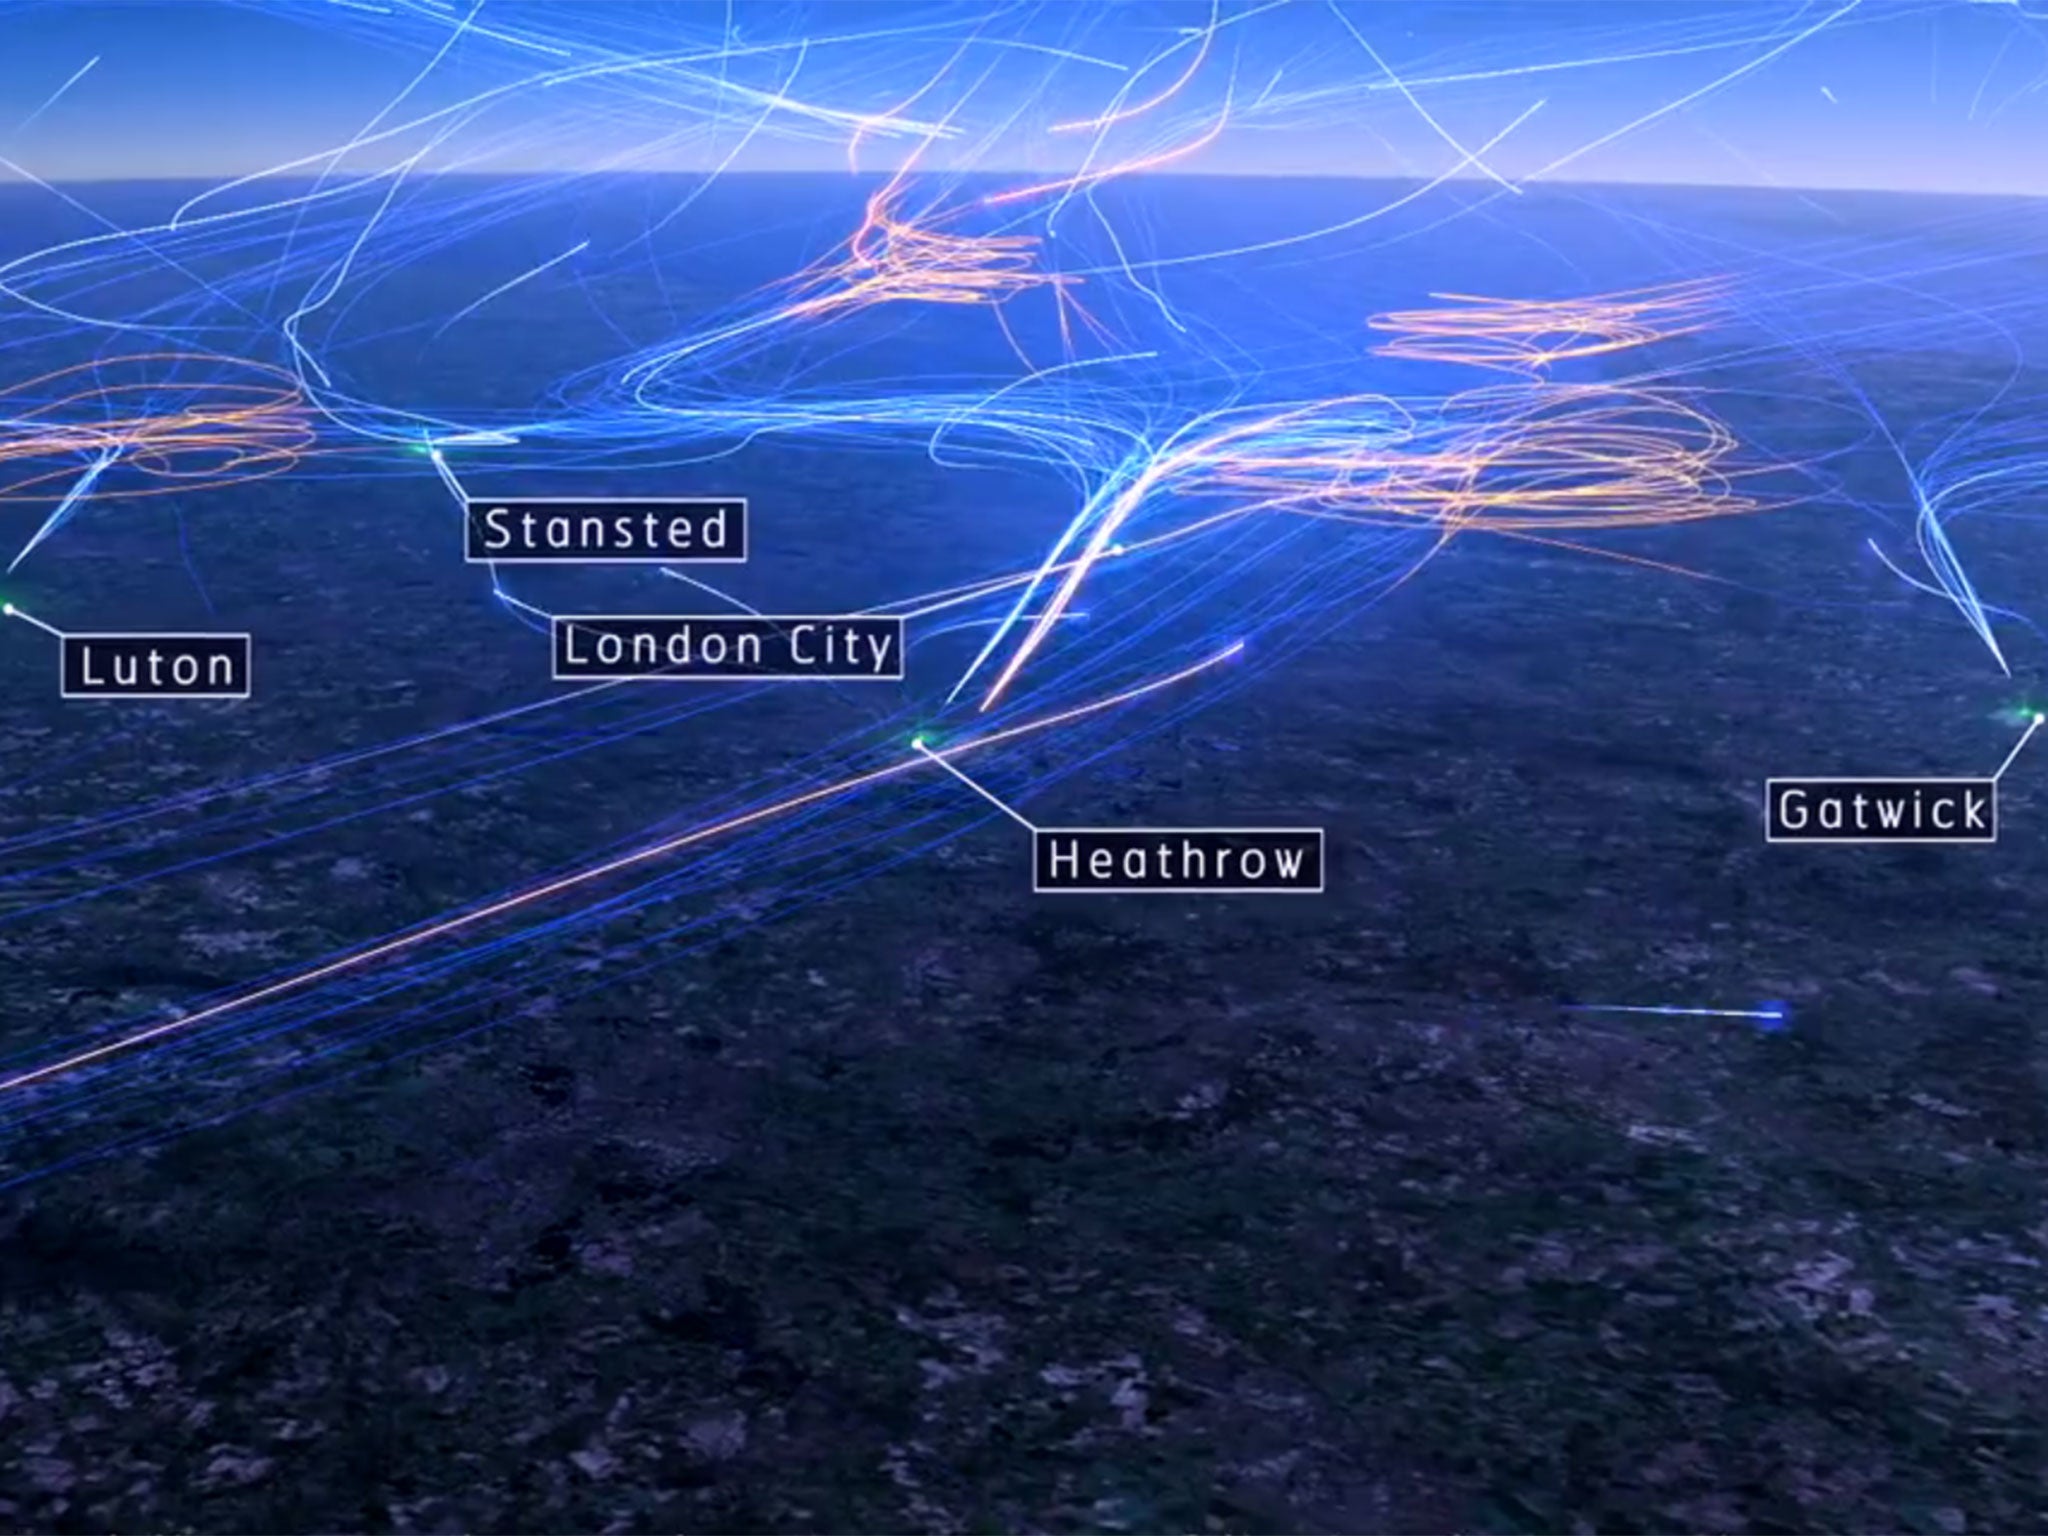 A ‘data visualisation’ video shows 7,000 flights over the UK’s skies on just one day, showing how Britain’s airspace is one of the busiest and most complex in the world.